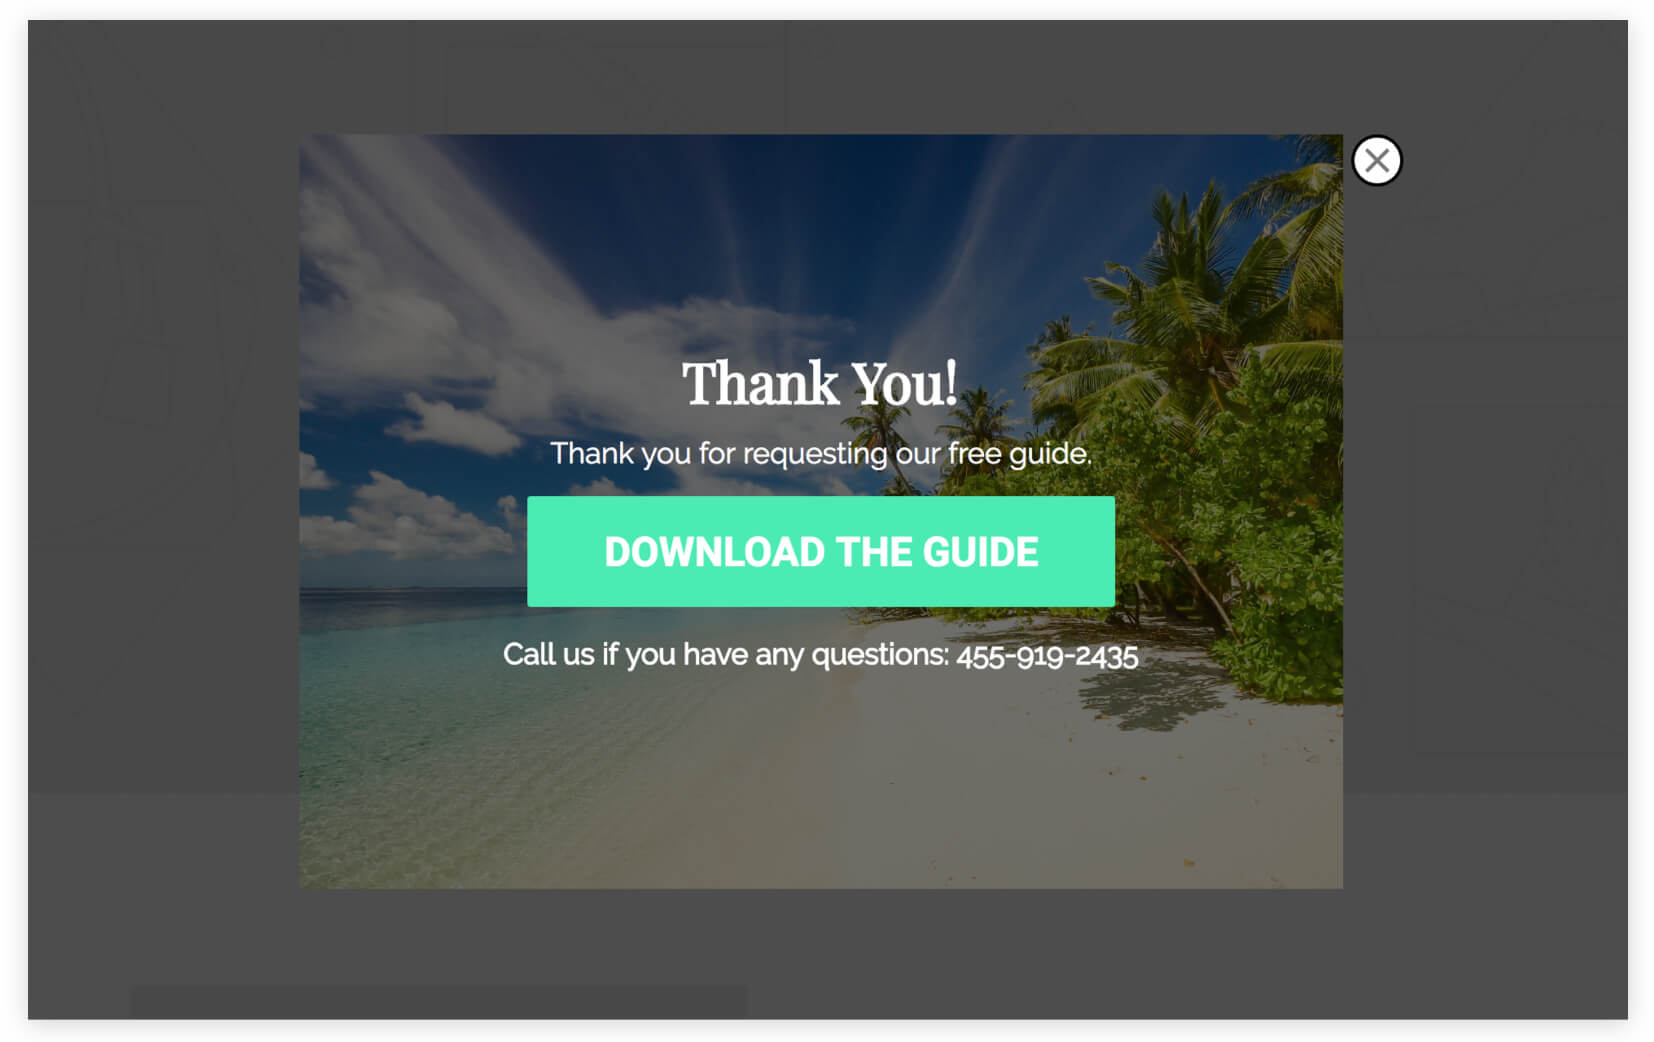 hotel resort free travel guide ebook sign up popup thank you view